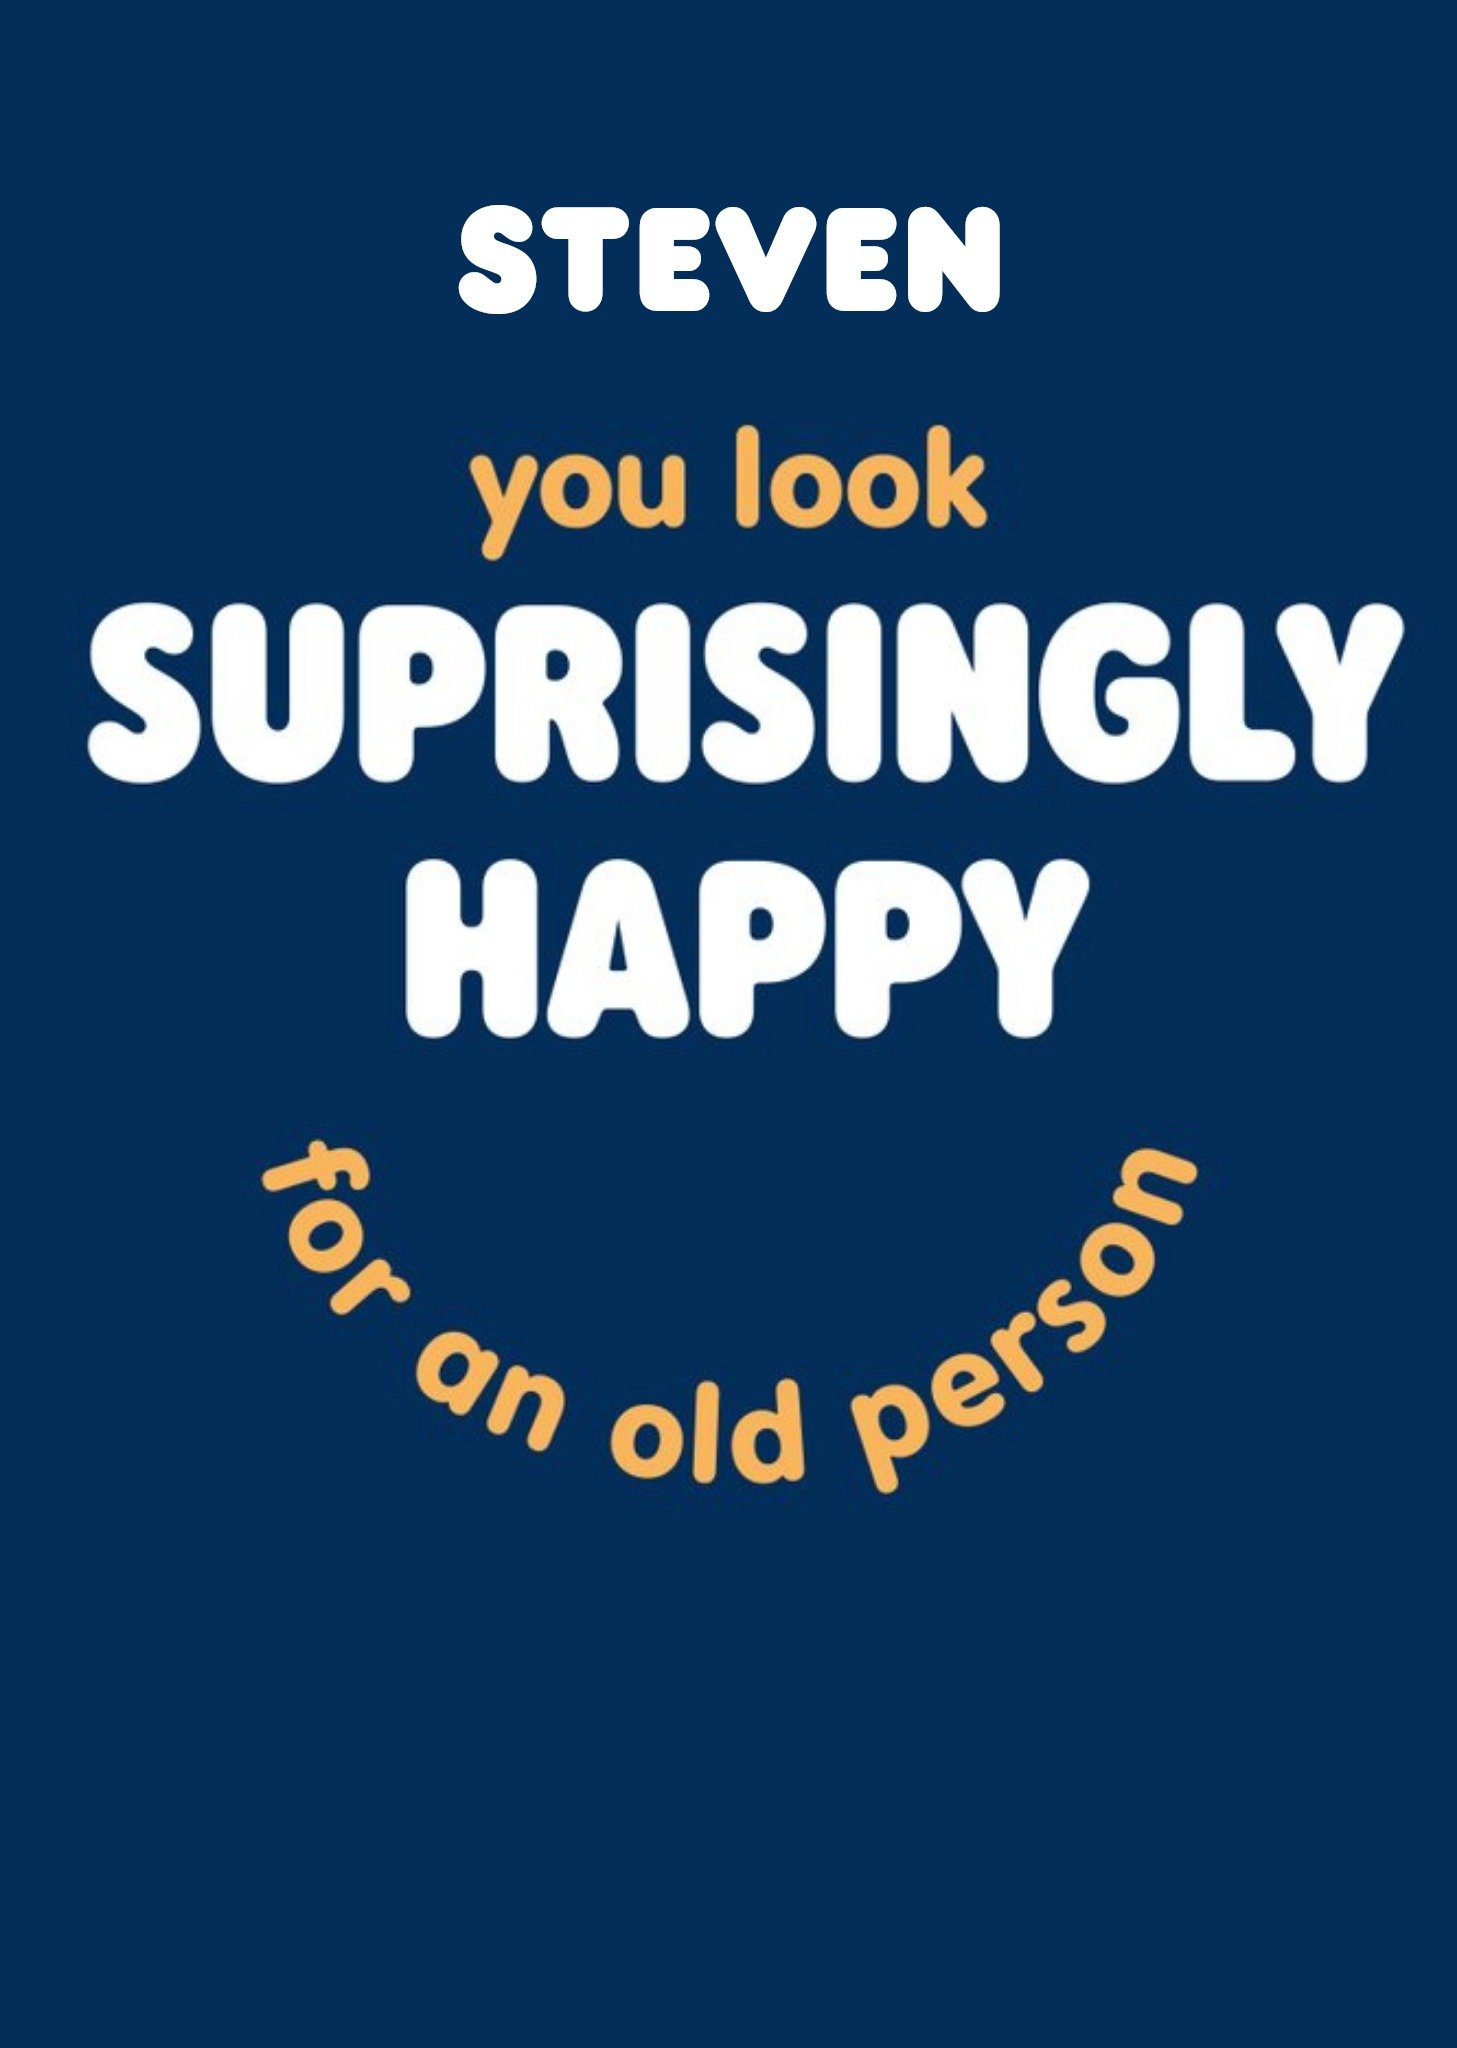 Moonpig Typographical Funny Suprisingly Happy For An Old Person Birthday Card, Large